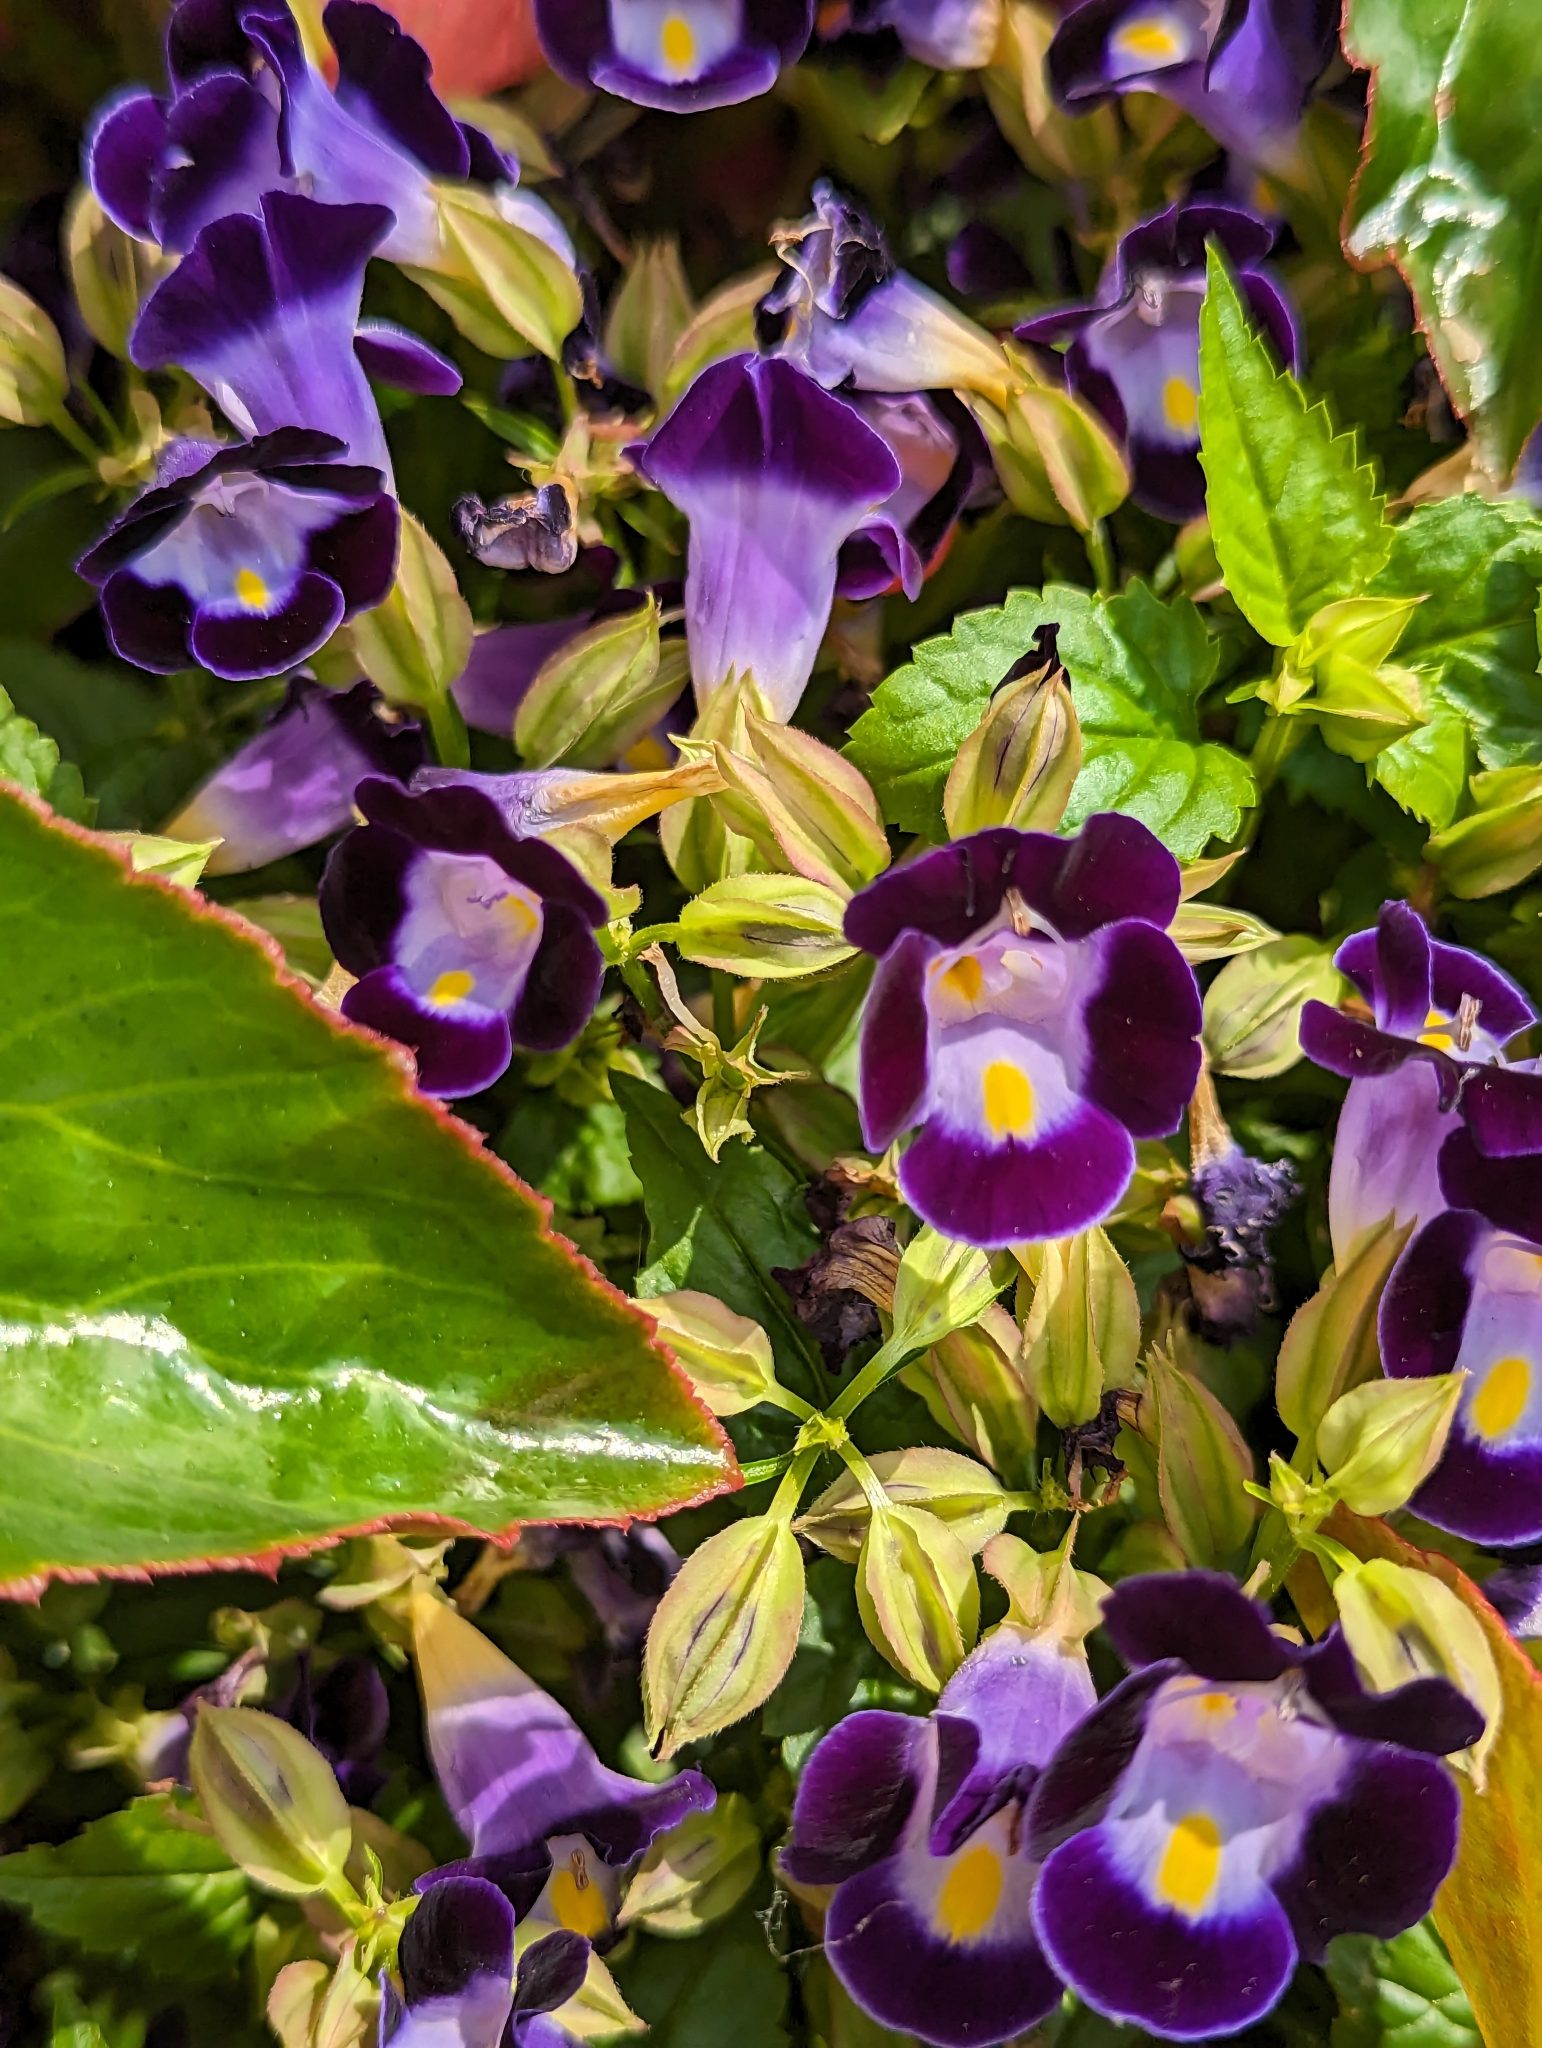 flowers in various shades of purple with green leaves